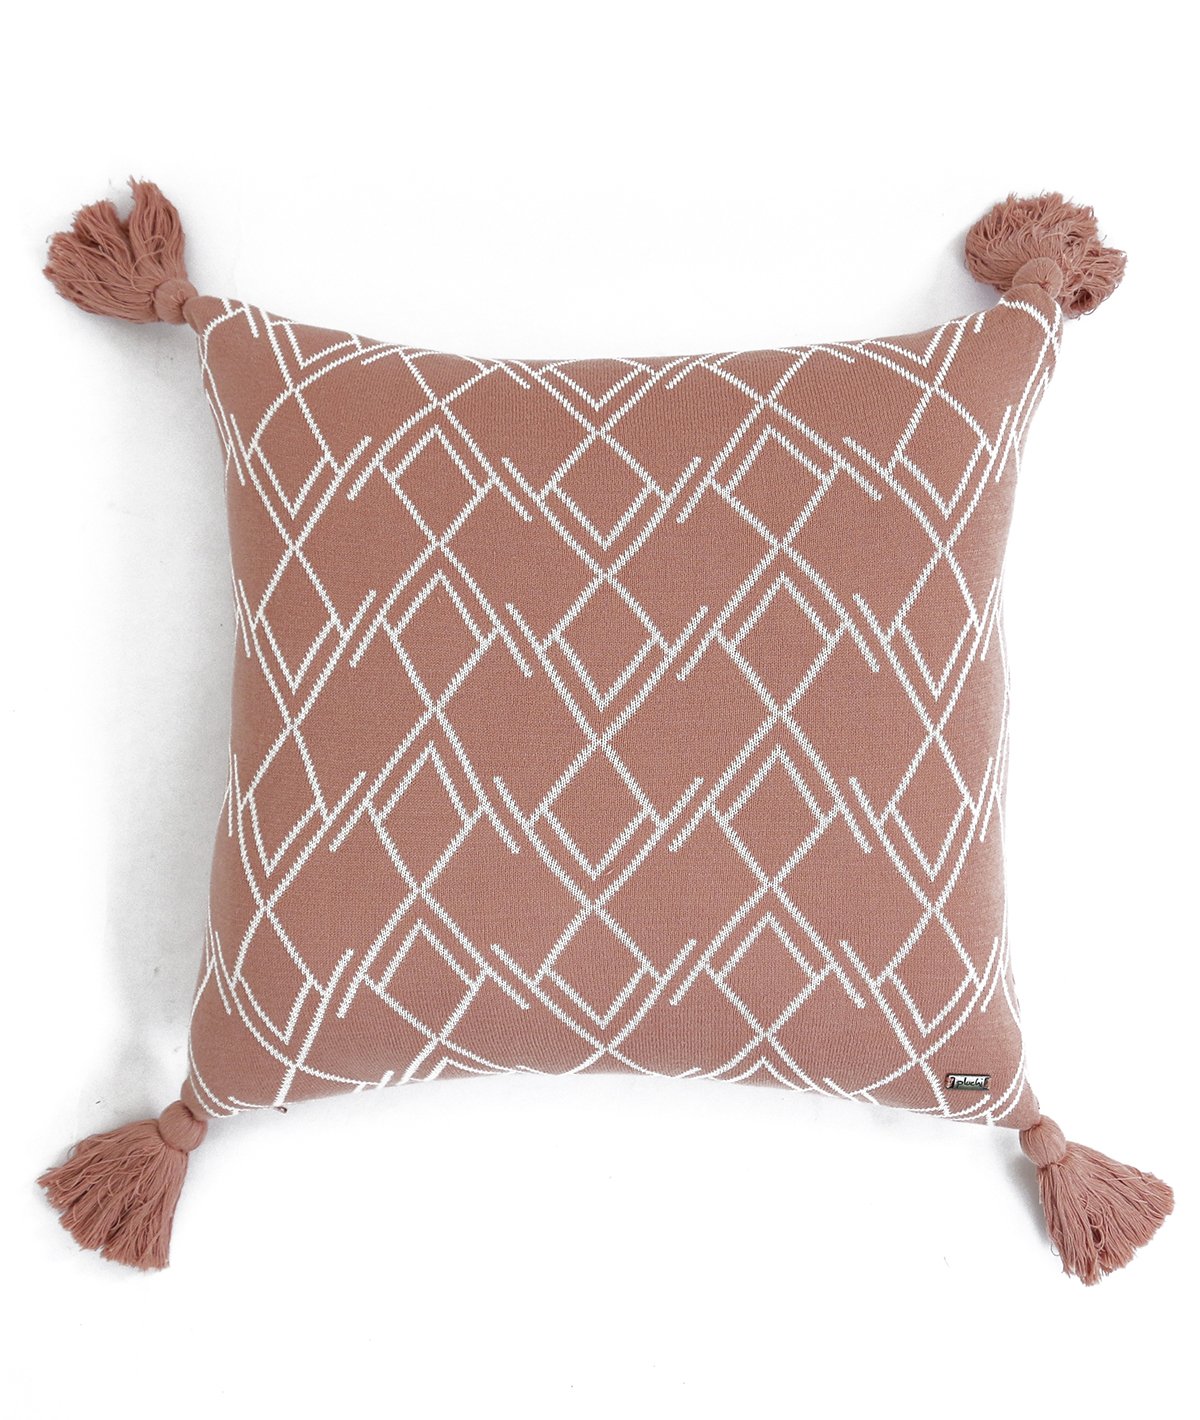 Gianna Cotton Knitted Decorative Dusty Coral & Natural Color 18 x 18 Inches Cushion Cover